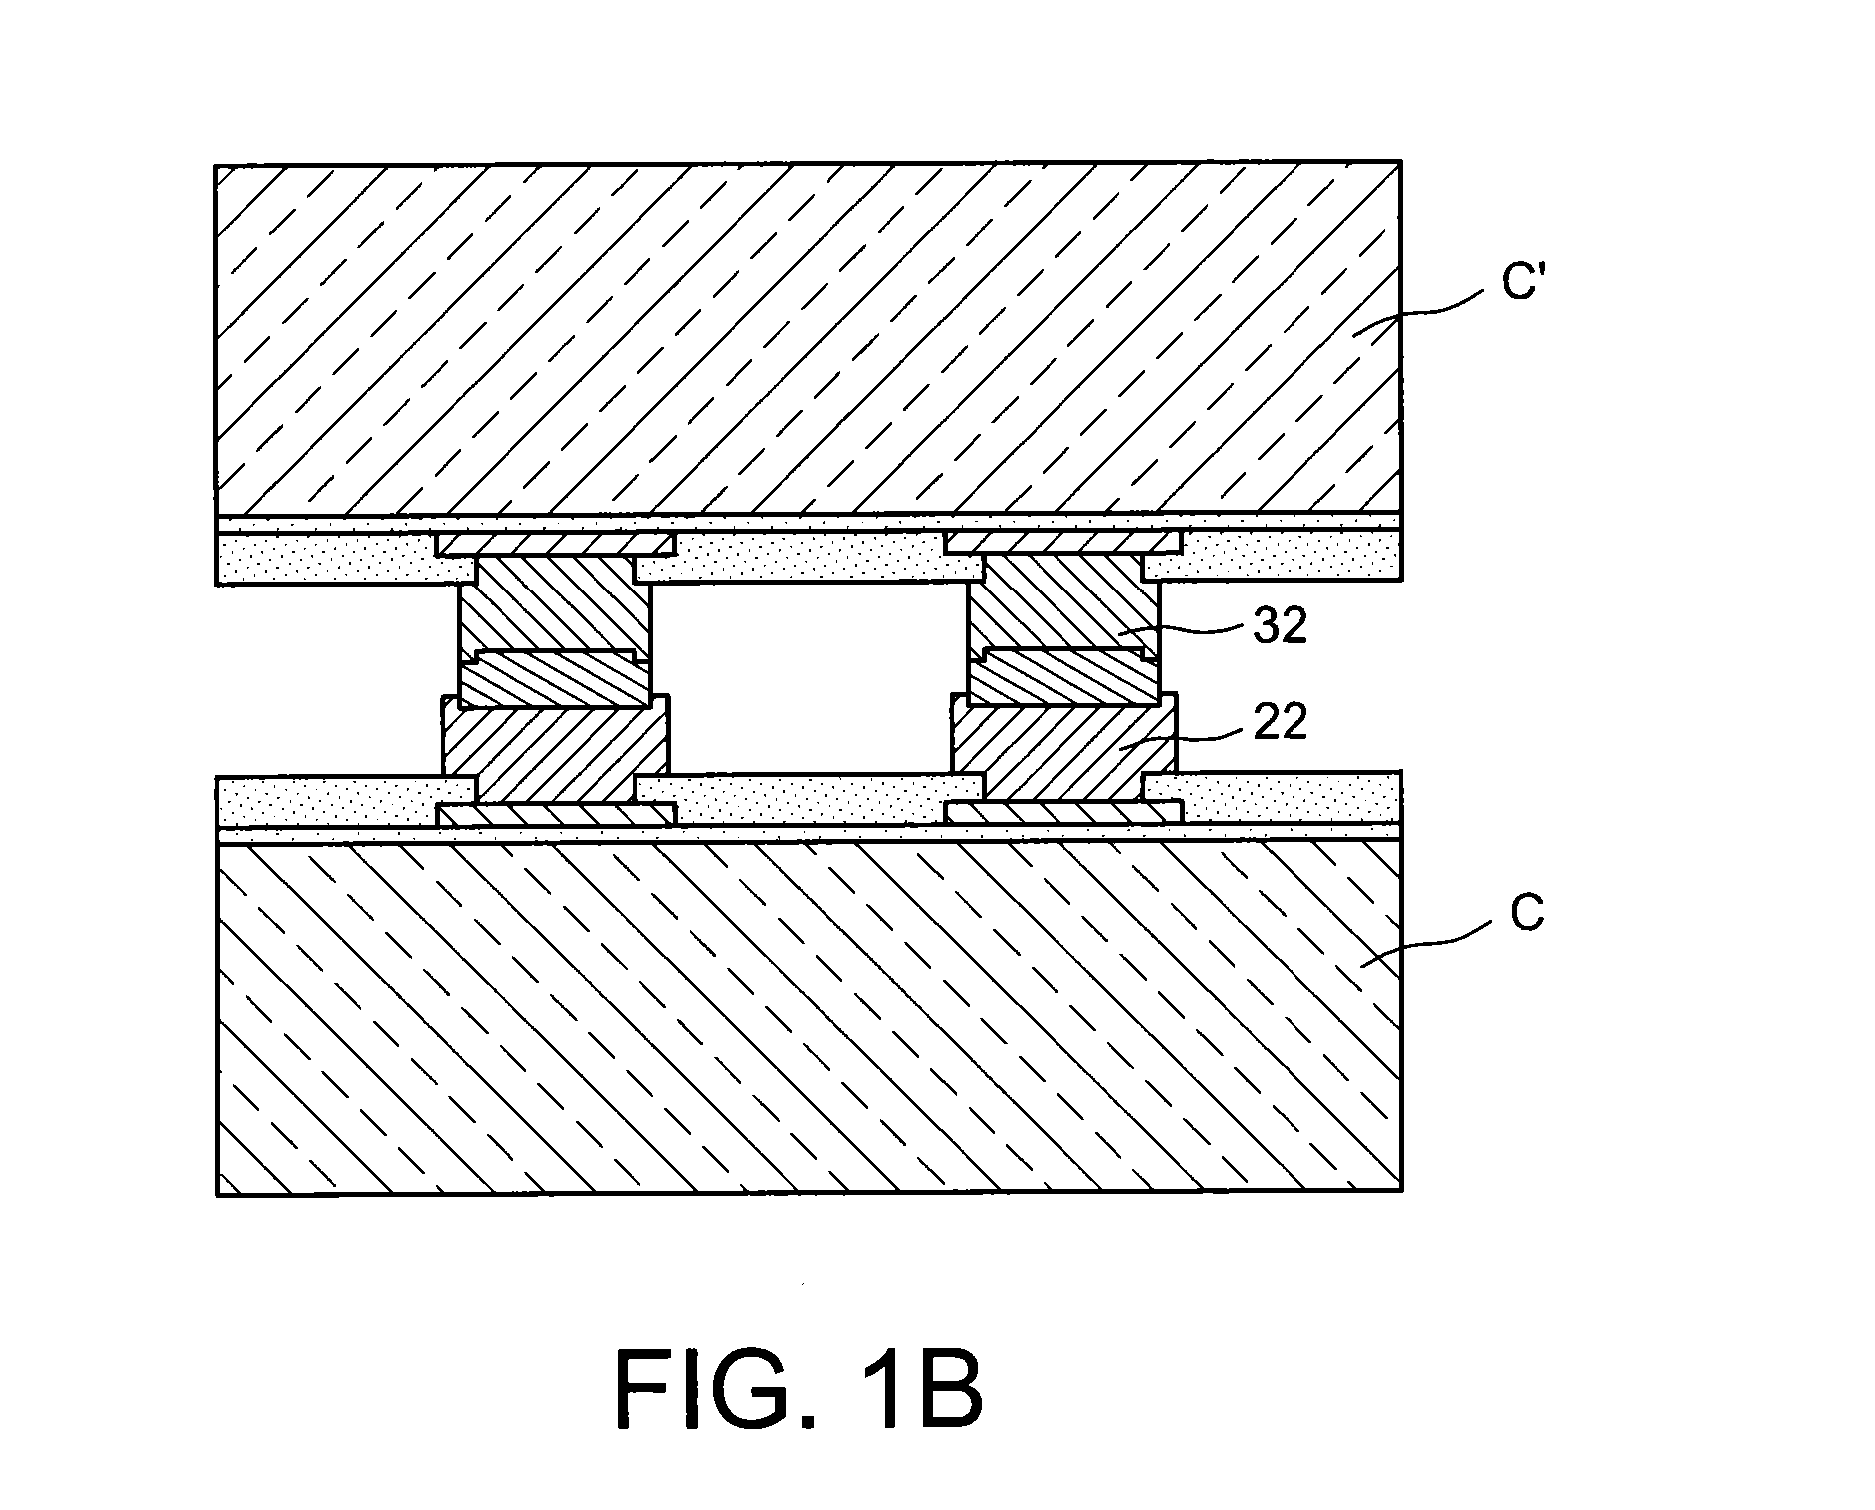 Method for producing a structure for microelectronic device assembly